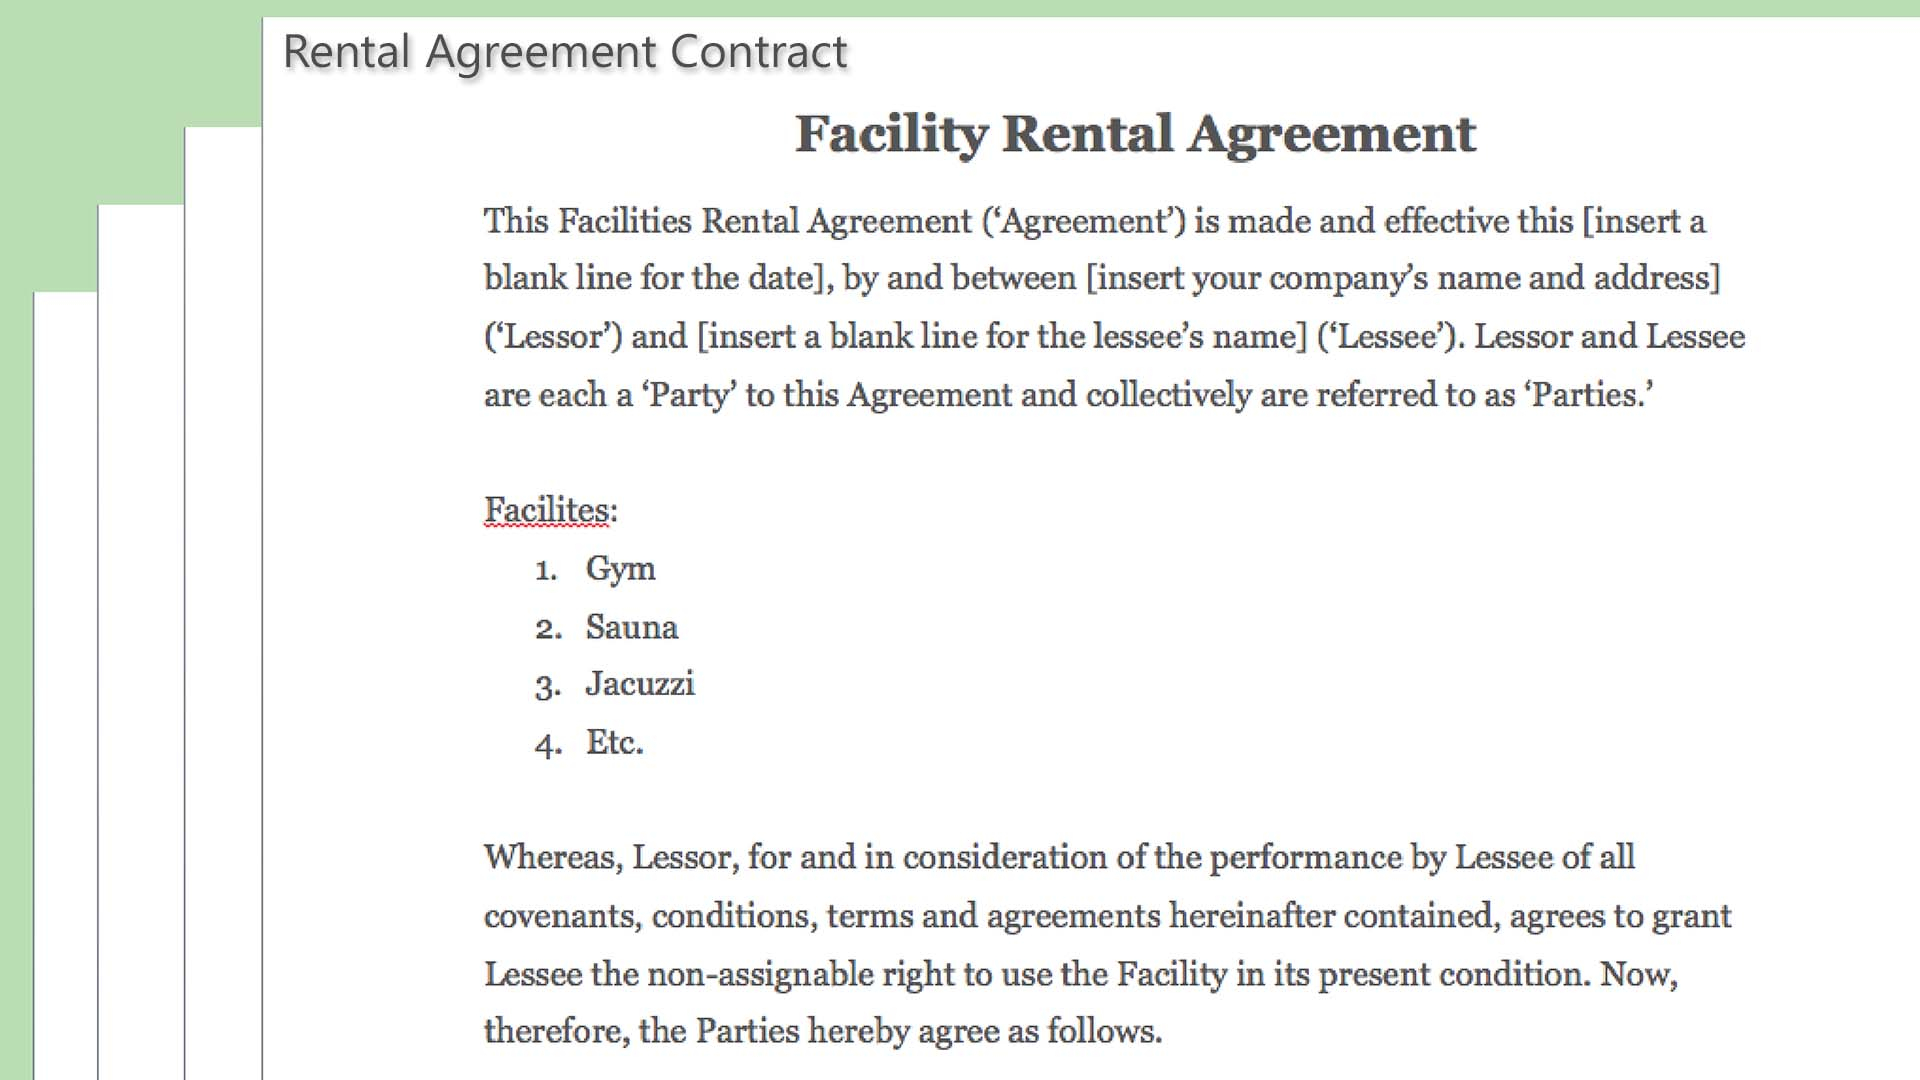 Rental Agreement Contract Rental Agreement Contract Construction Forum